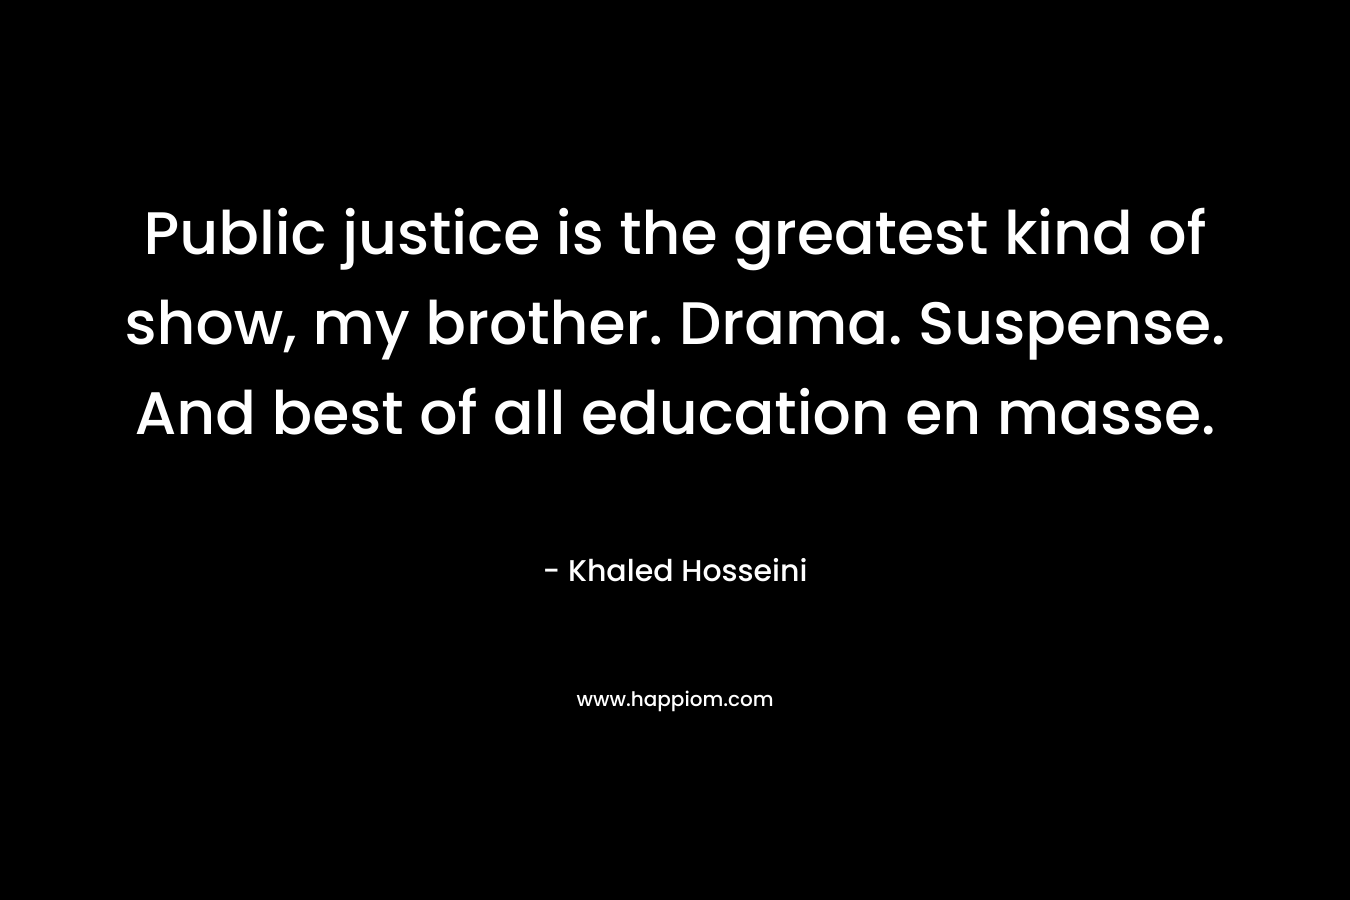 Public justice is the greatest kind of show, my brother. Drama. Suspense. And best of all education en masse.